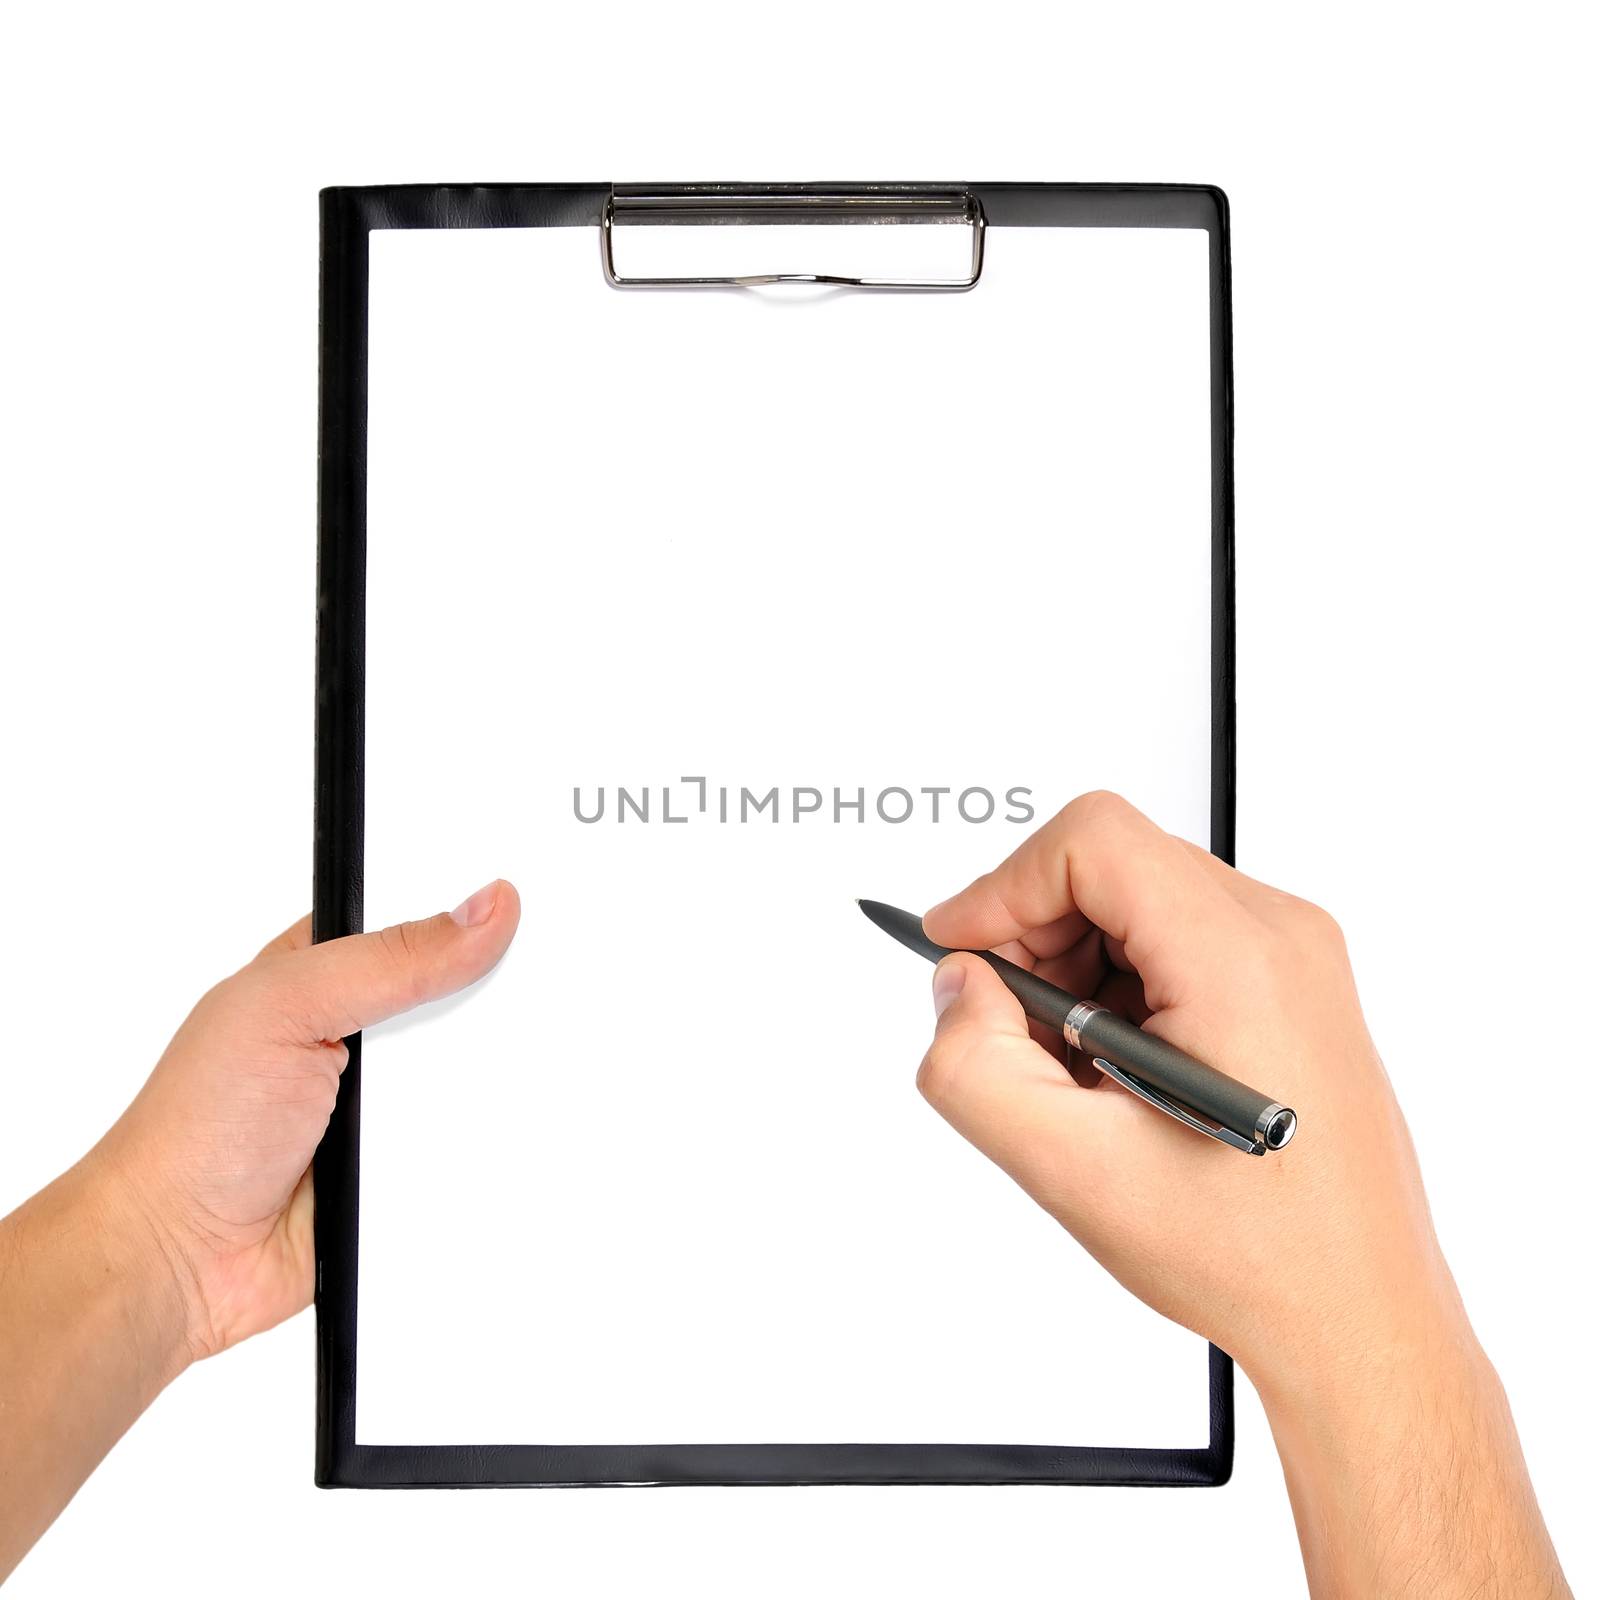 blank clipboard and pen in hand